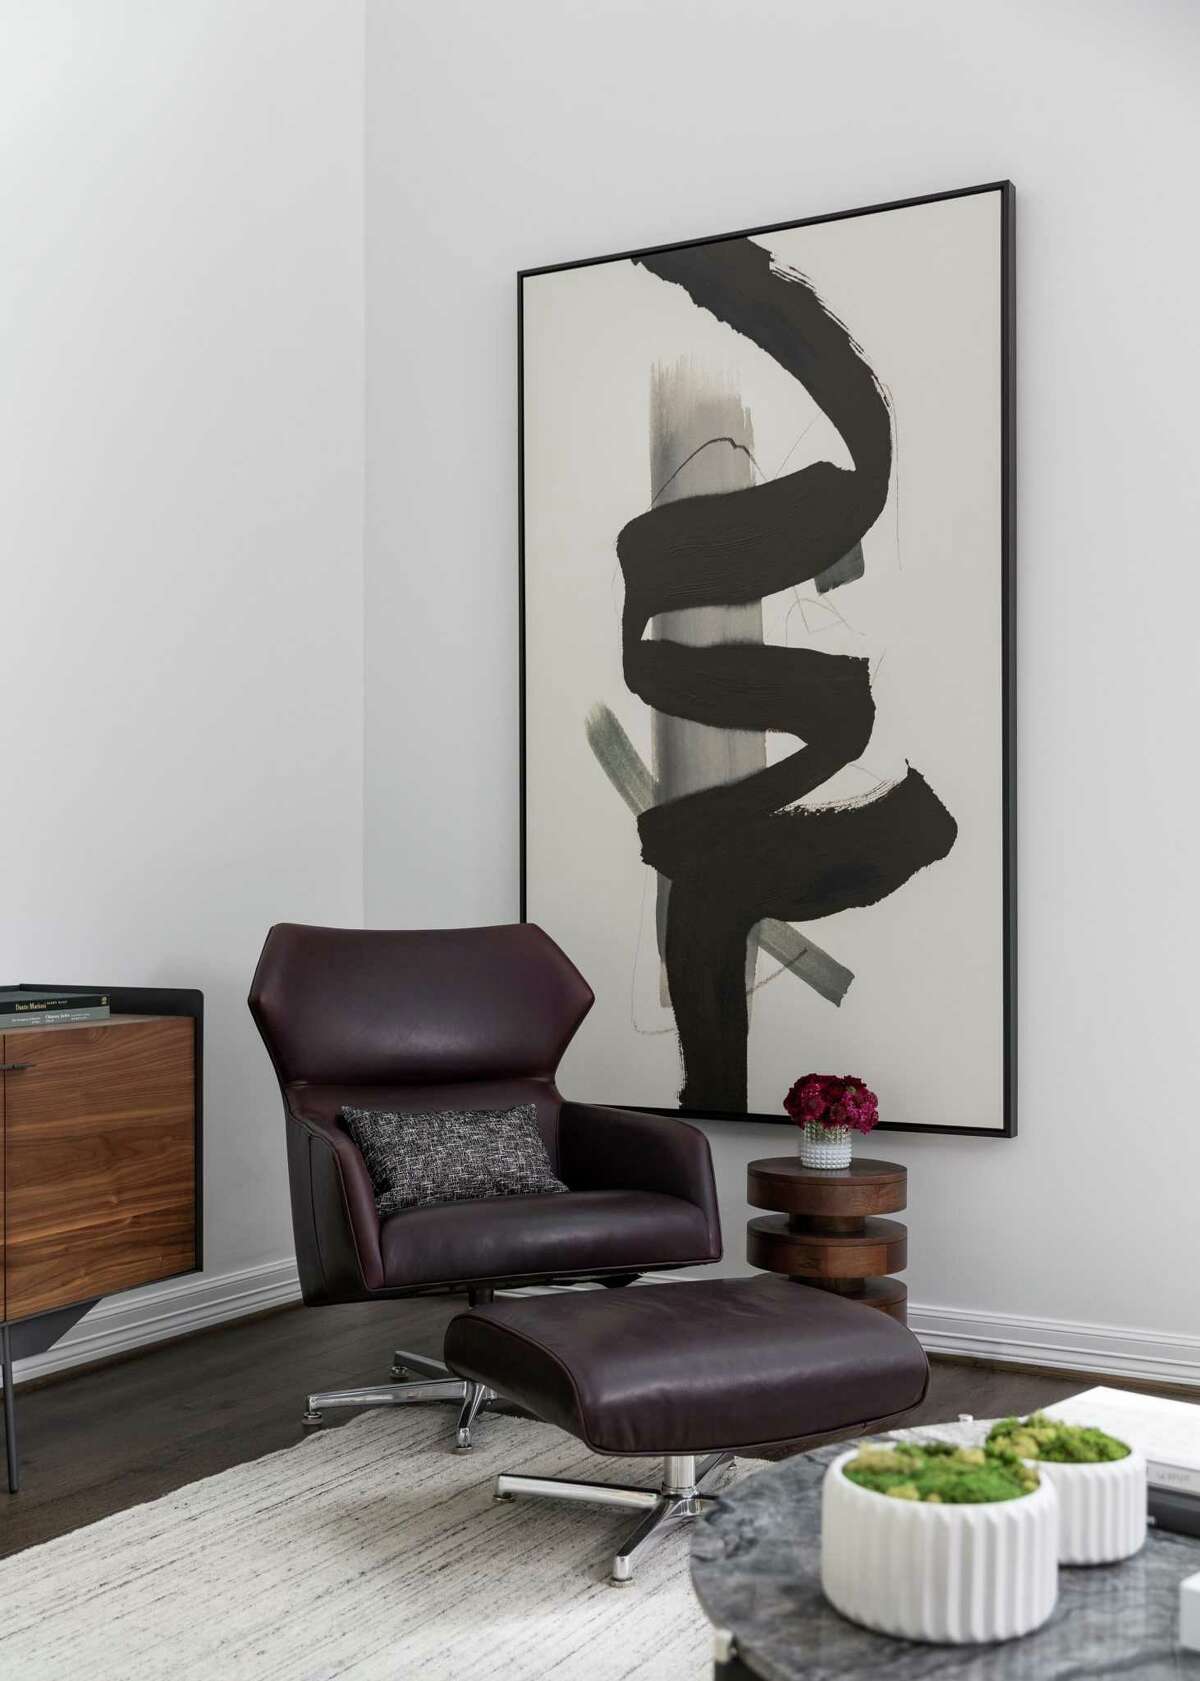 One corner of the living room has a deep burgundy chair and ottoman in front of a large-scale abstract painting.